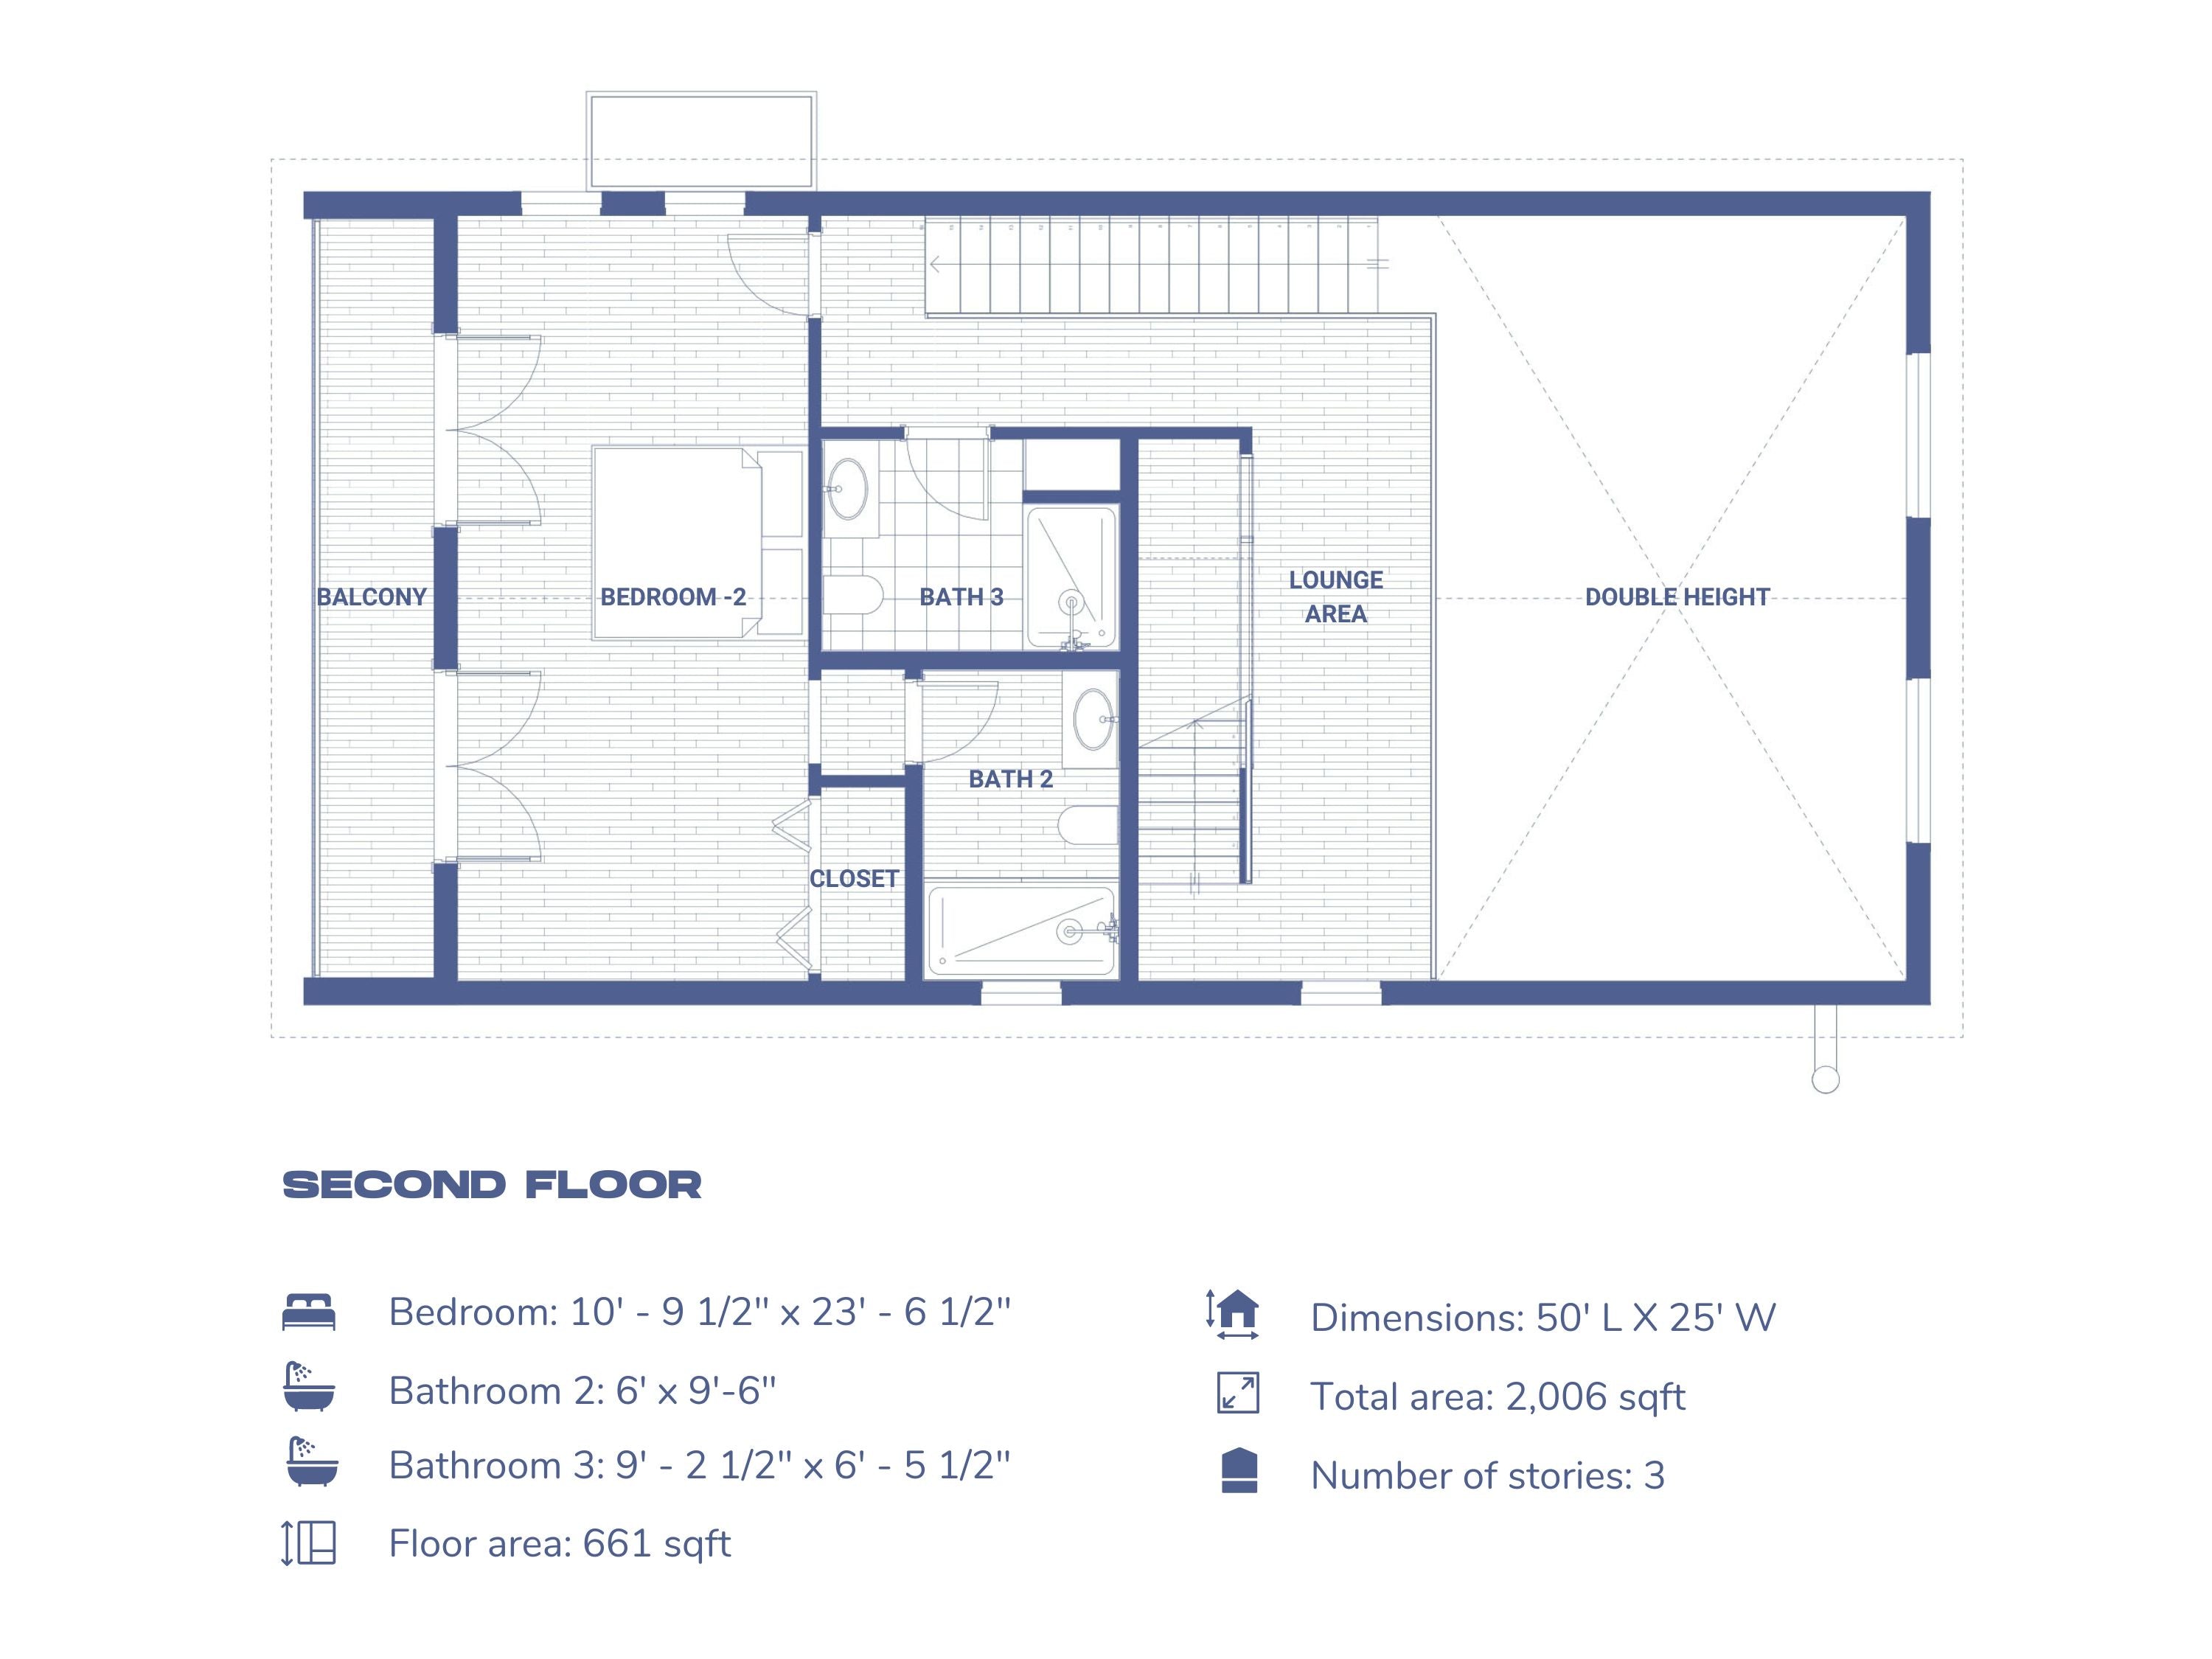 Second story floorplan, A large master suite bedroom and additional bathroom